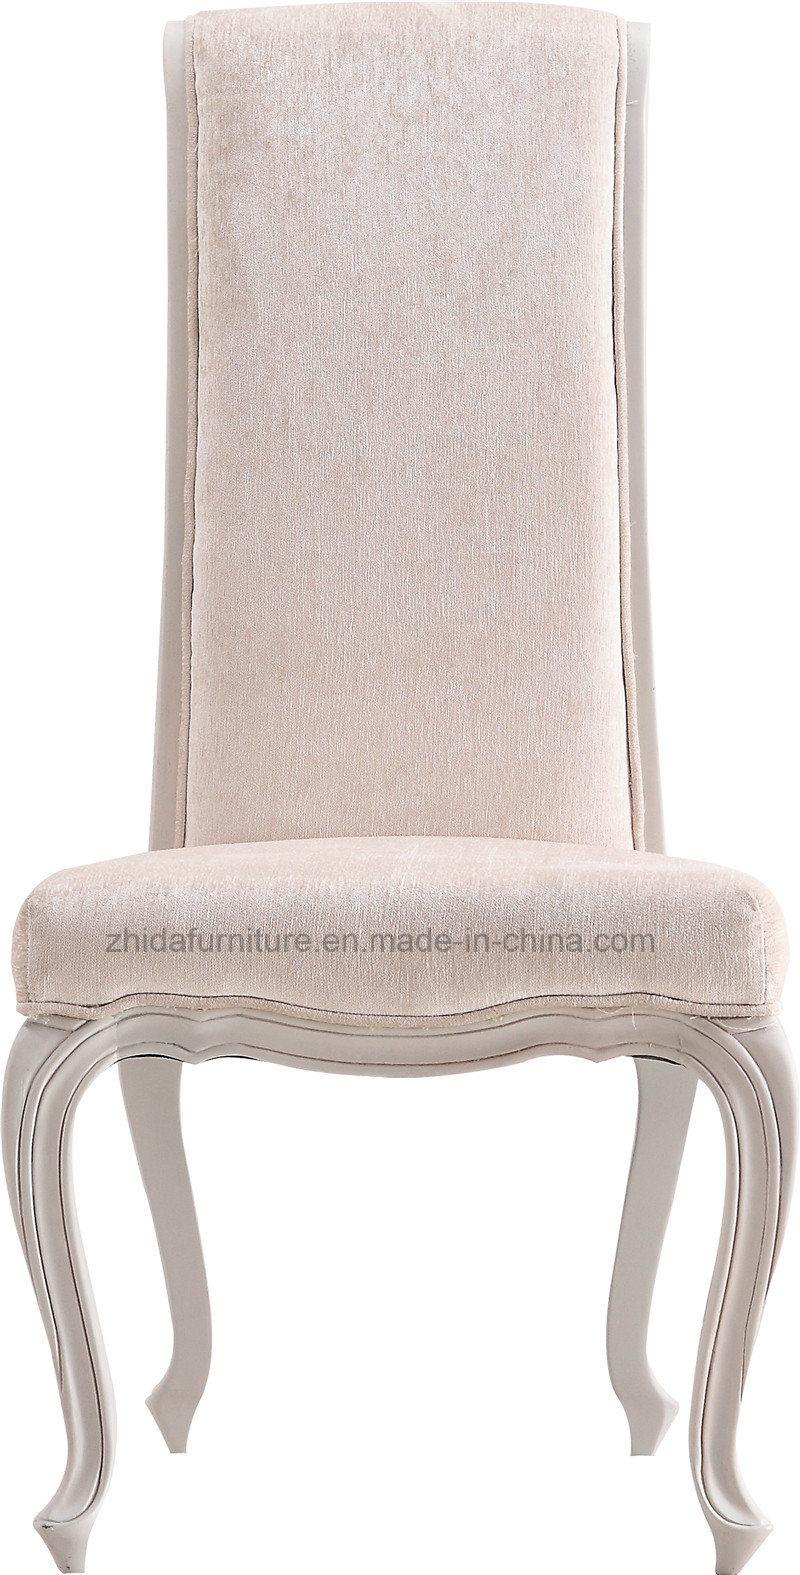 Contemporary Hotel Furniture Living Room Chair